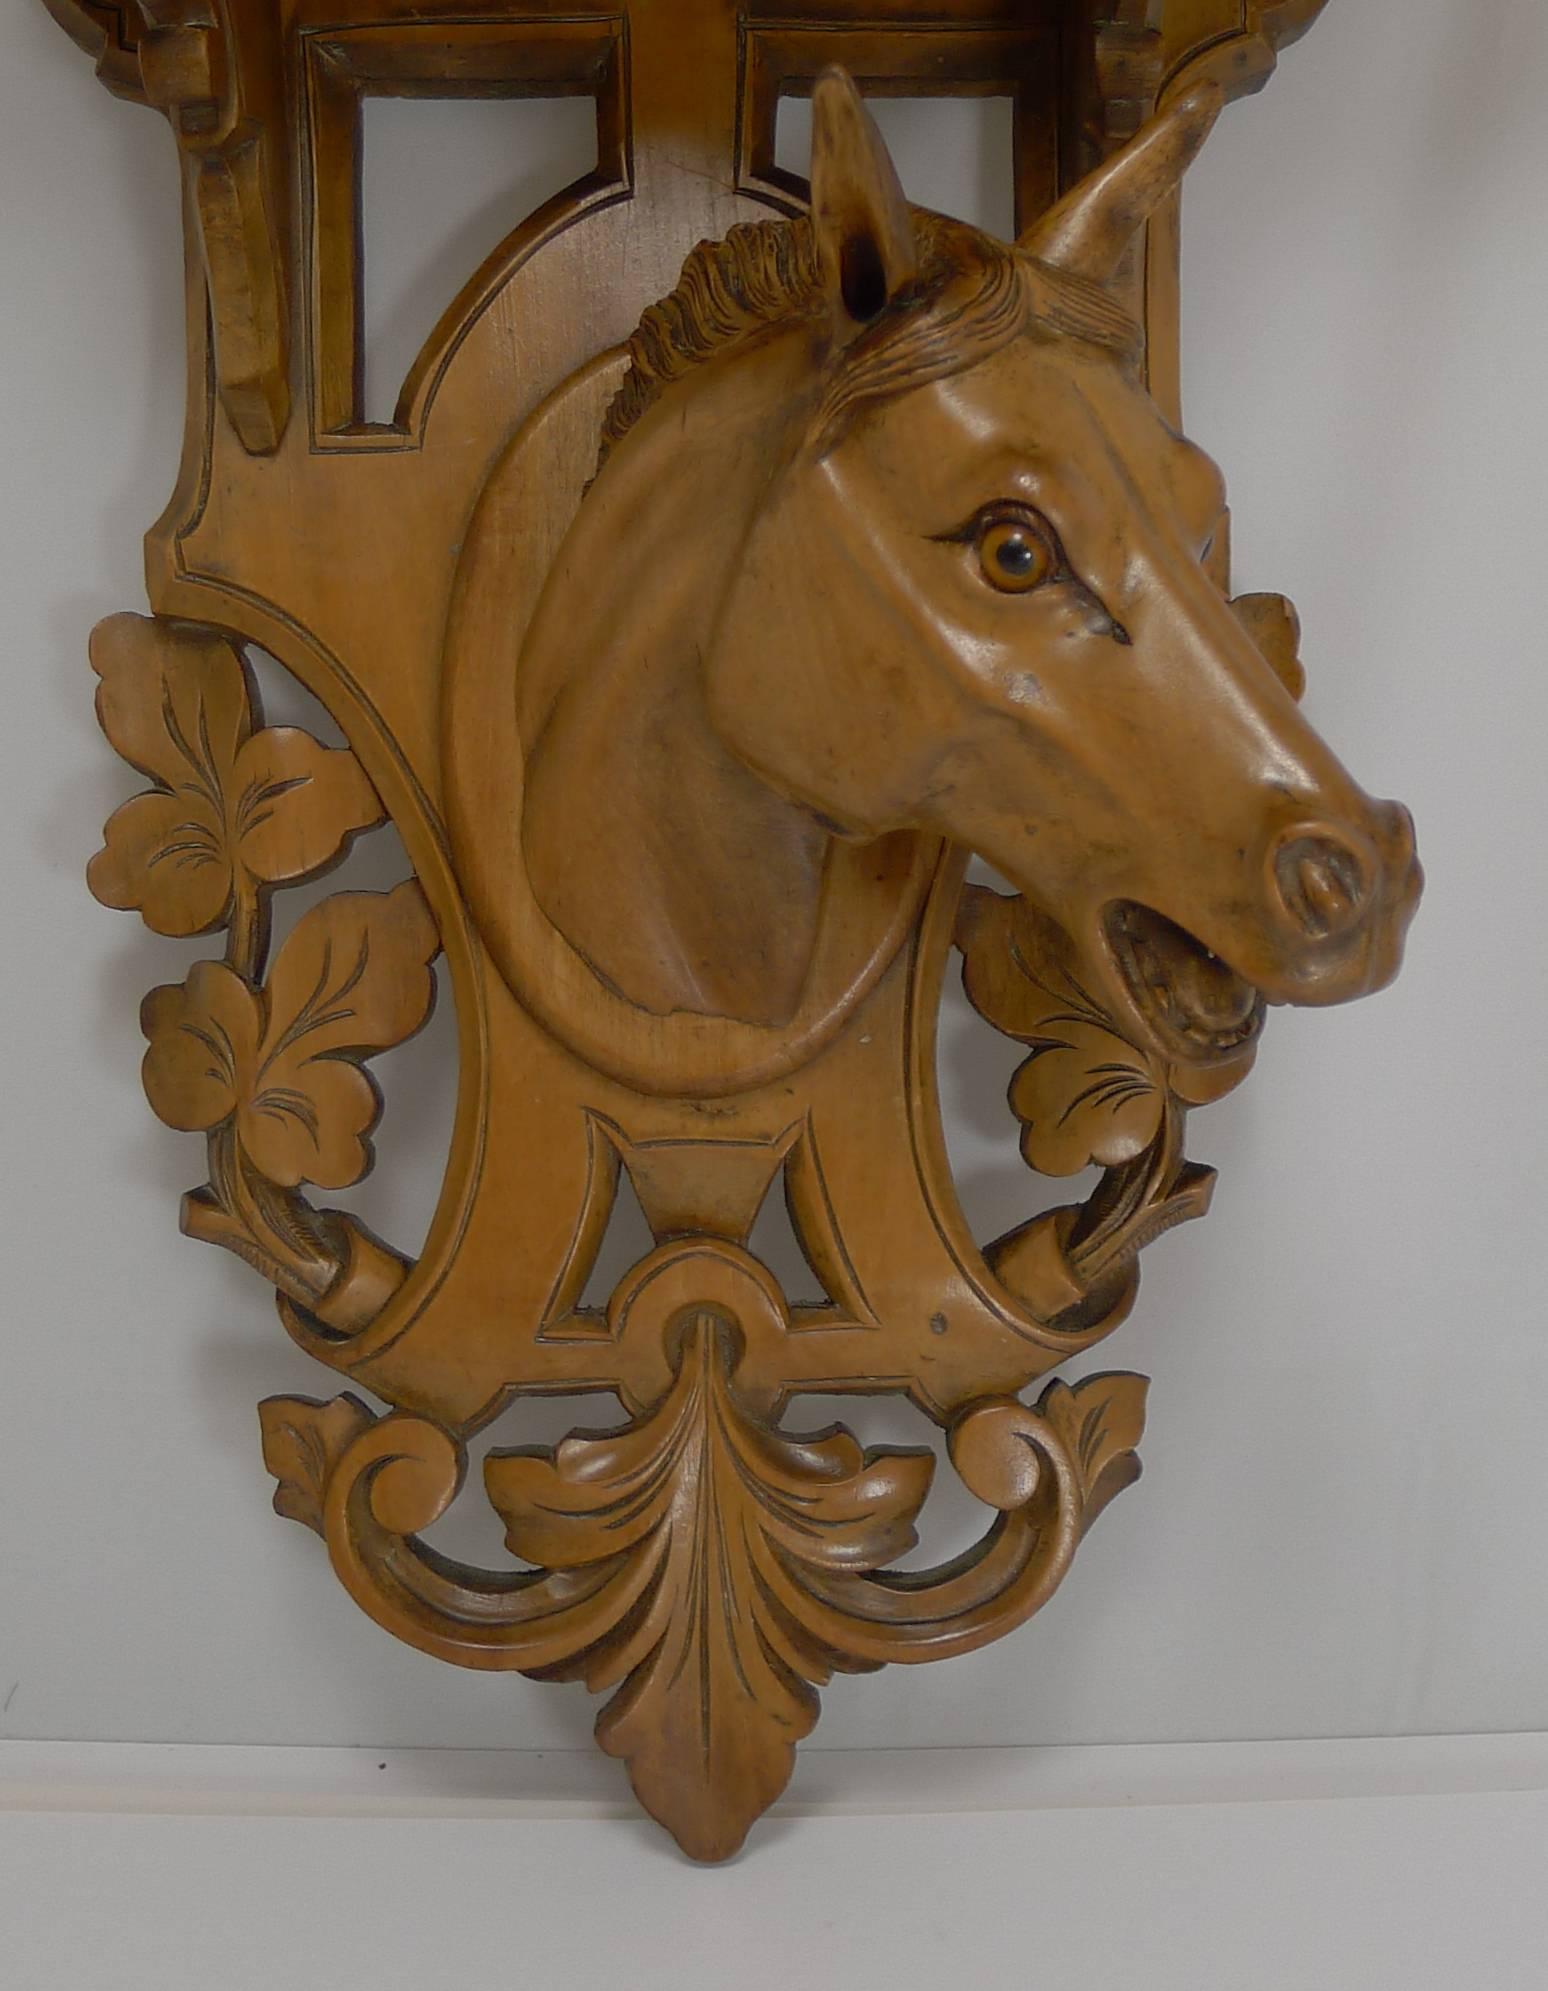 A handsome and beautifully executed fruitwood hand-carved wall bracket featuring a horse's head retaining two endearing glass eyes.

Late Victorian in era, dating to circa 1890 and without damage.

Measures: 6 1/4